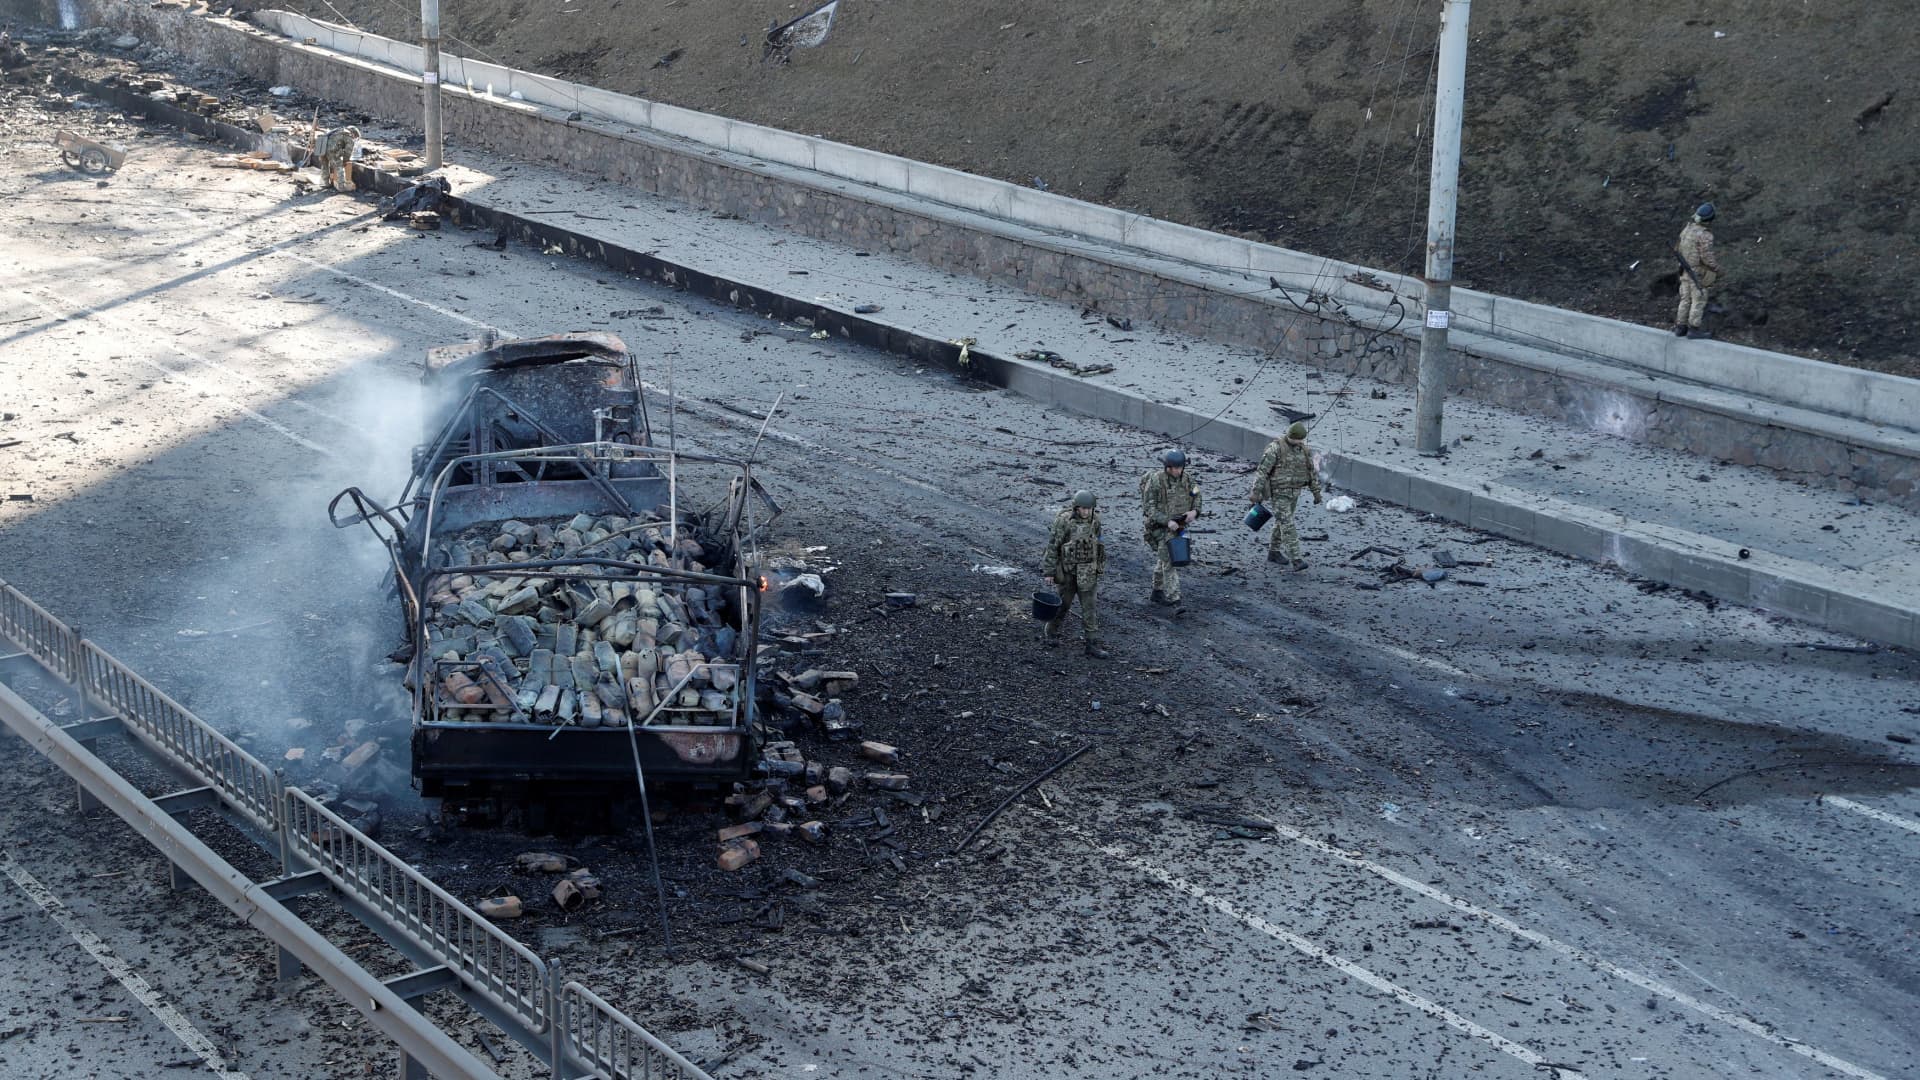 Ukrainian servicemen walk by a damaged vehicle, at the site of a fighting with Russian troops, after Russia launched a massive military operation against Ukraine, in Kyiv, Ukraine February 26, 2022.